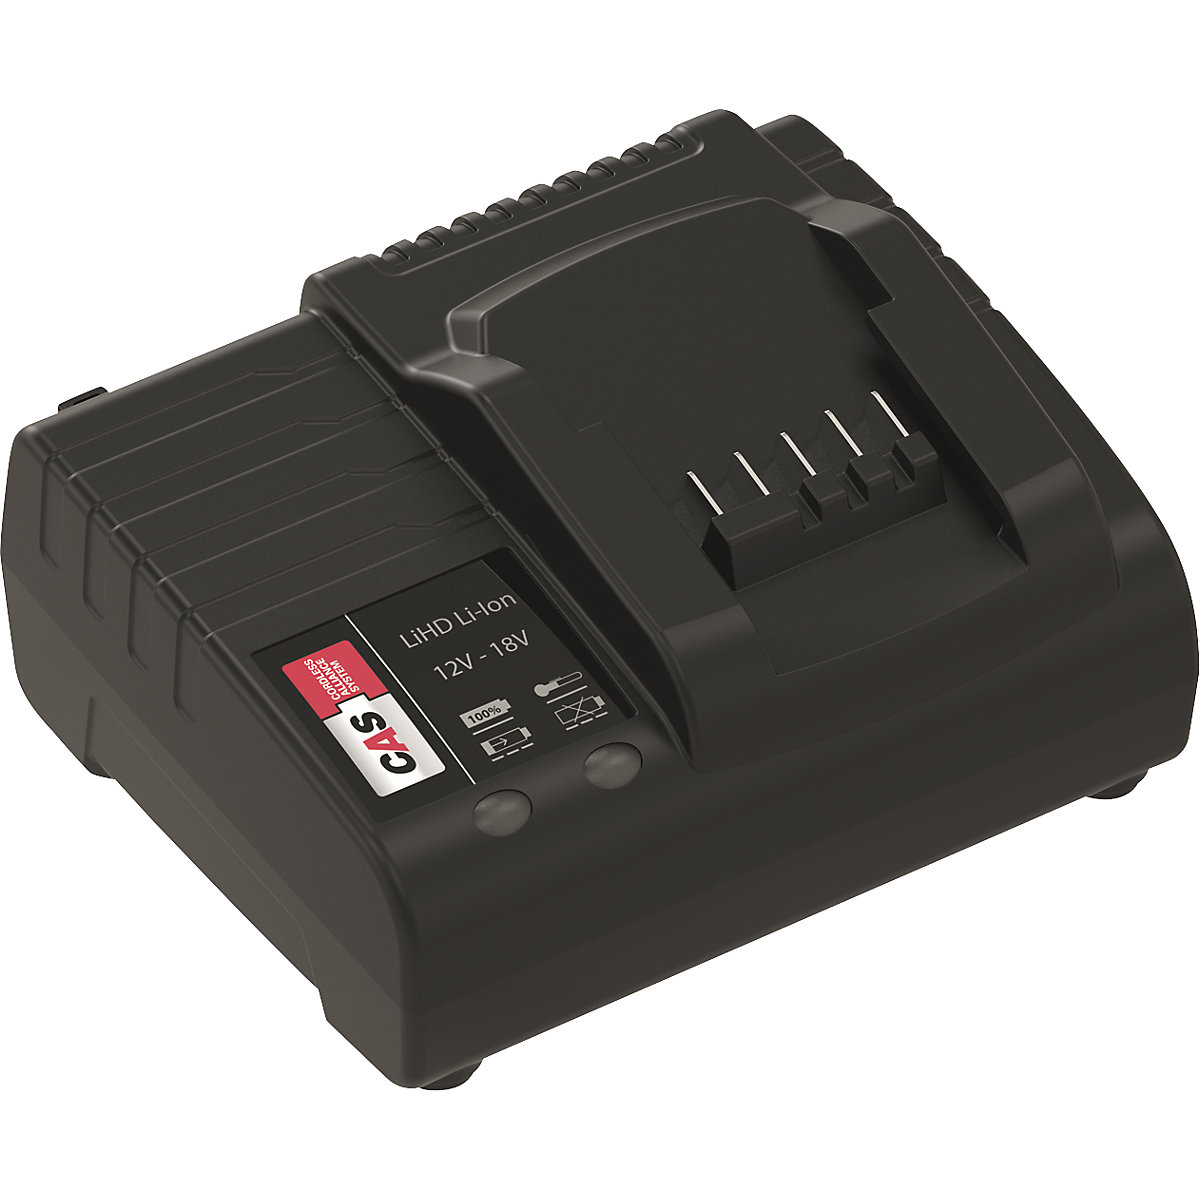 Rechargeable battery charger - SCANGRIP